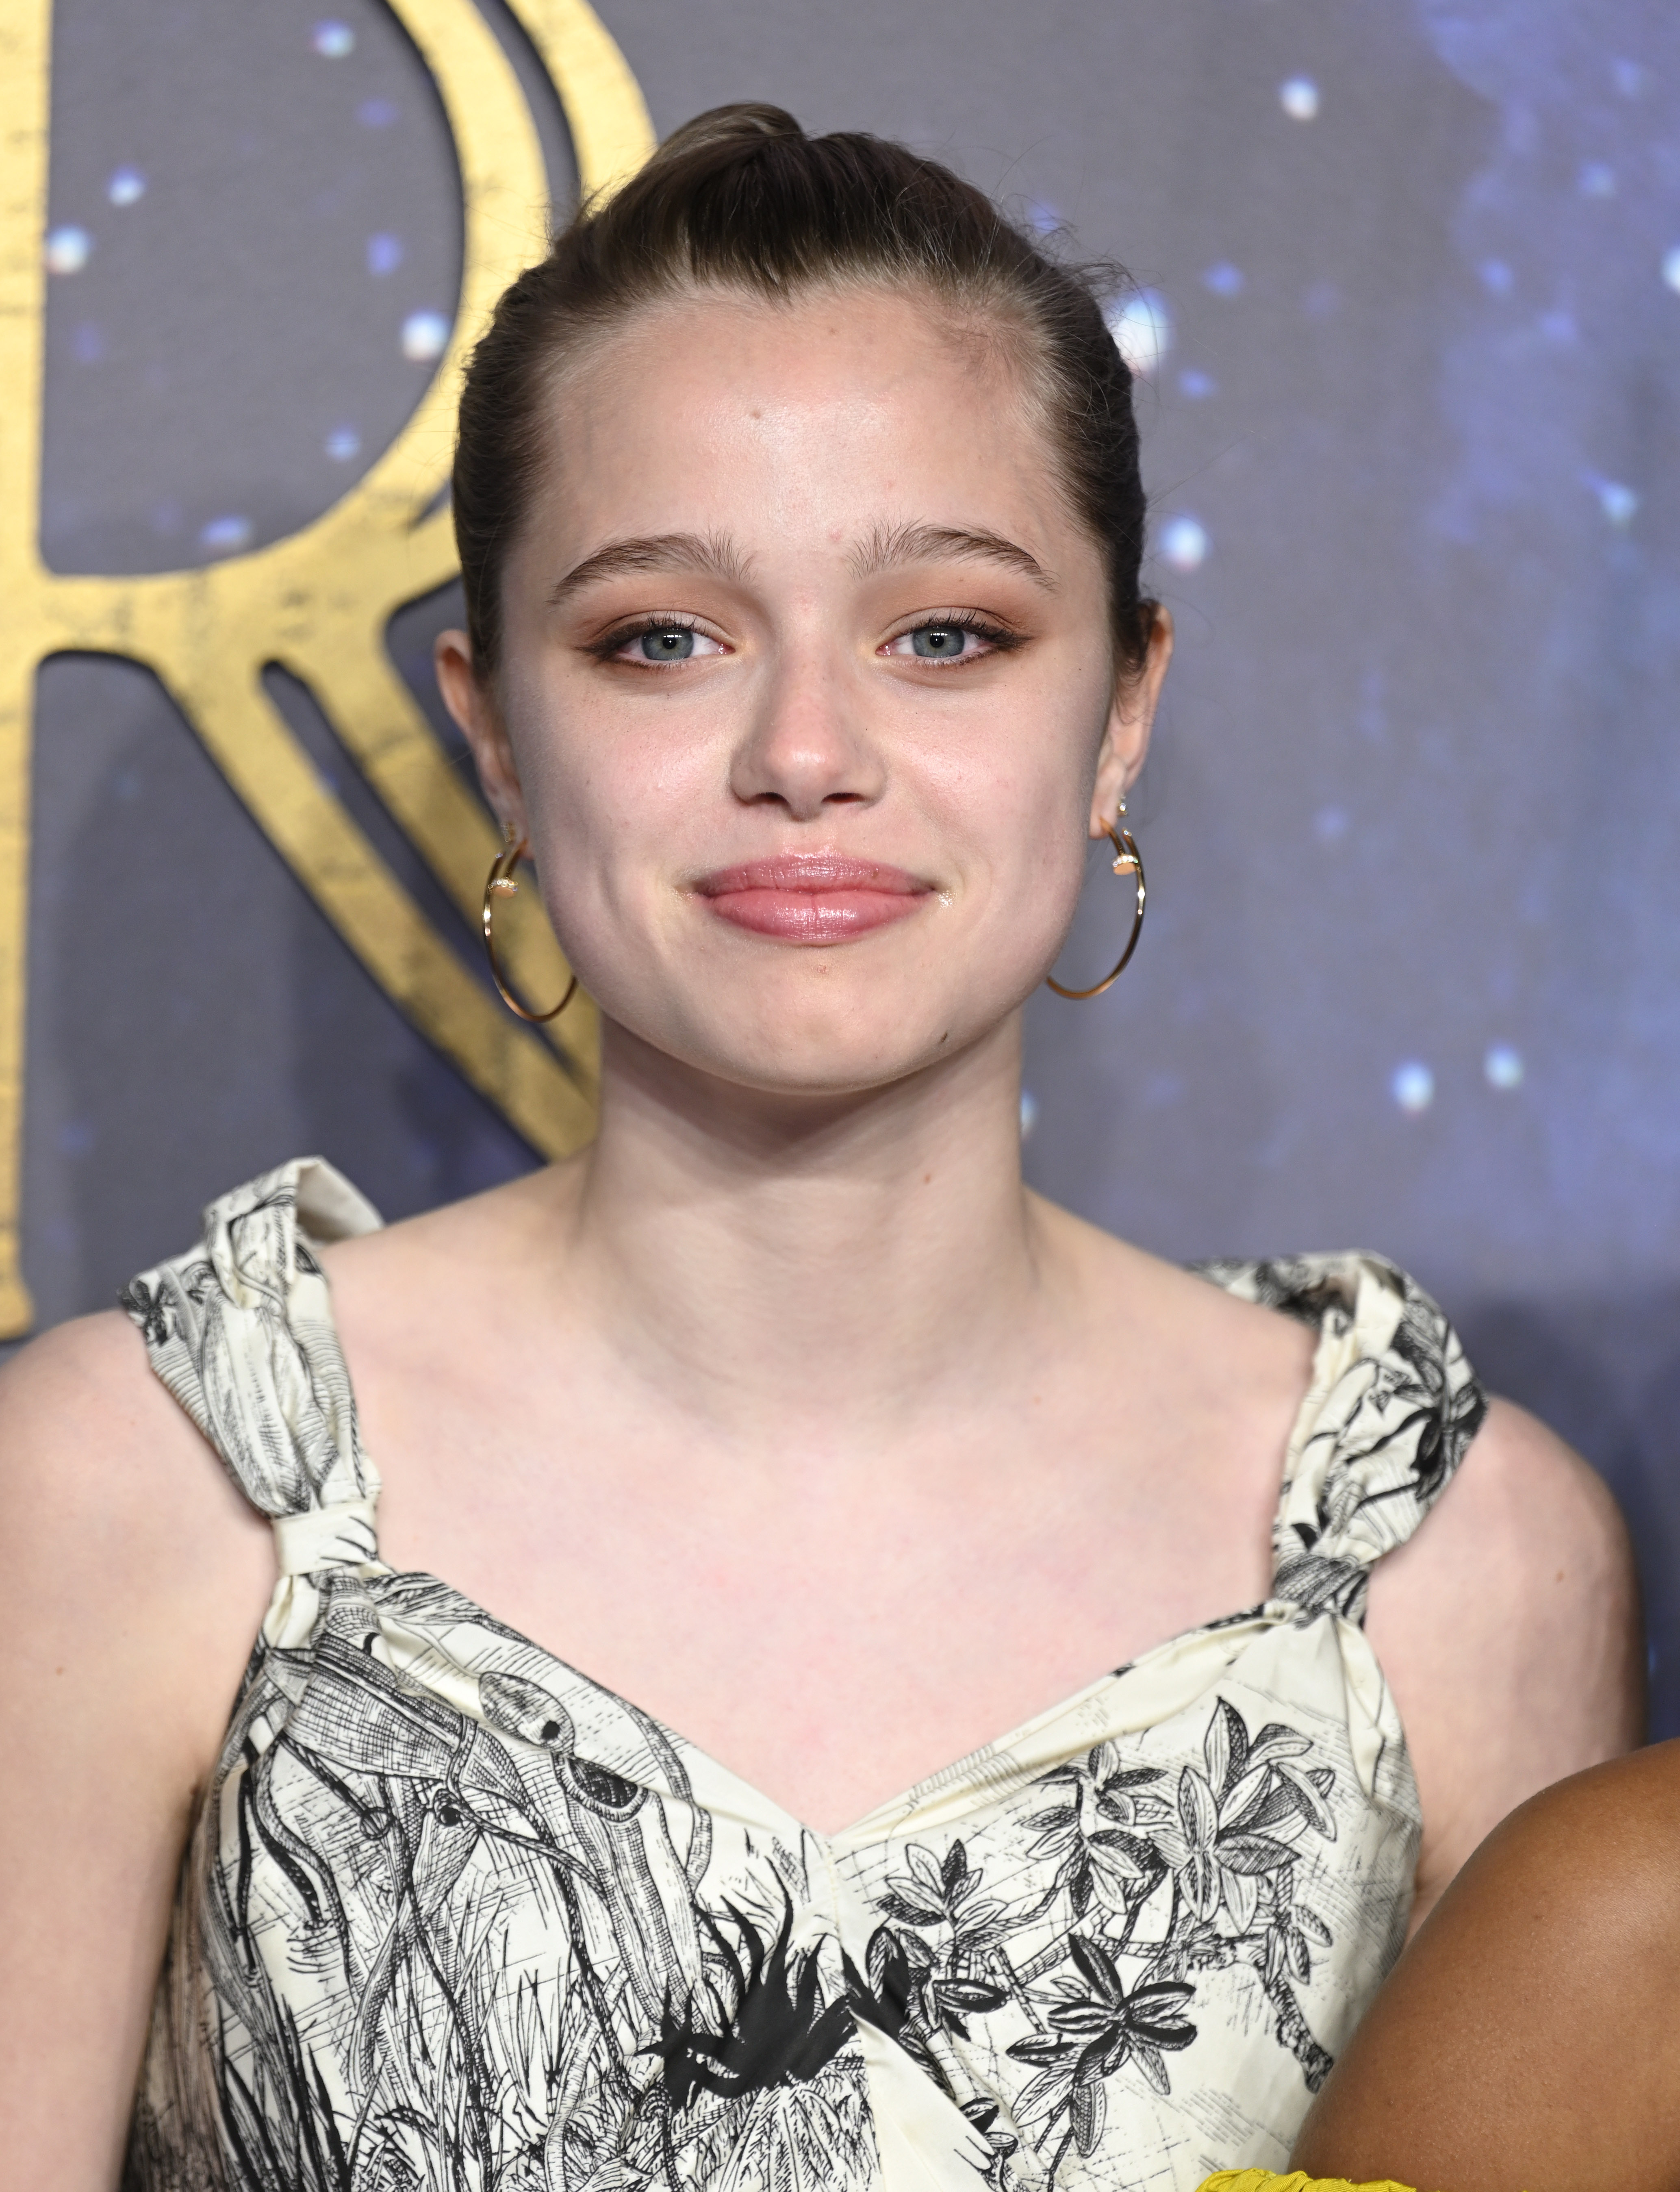 Shiloh at "The Eternals" premiere in 2021 | Source: Getty Images